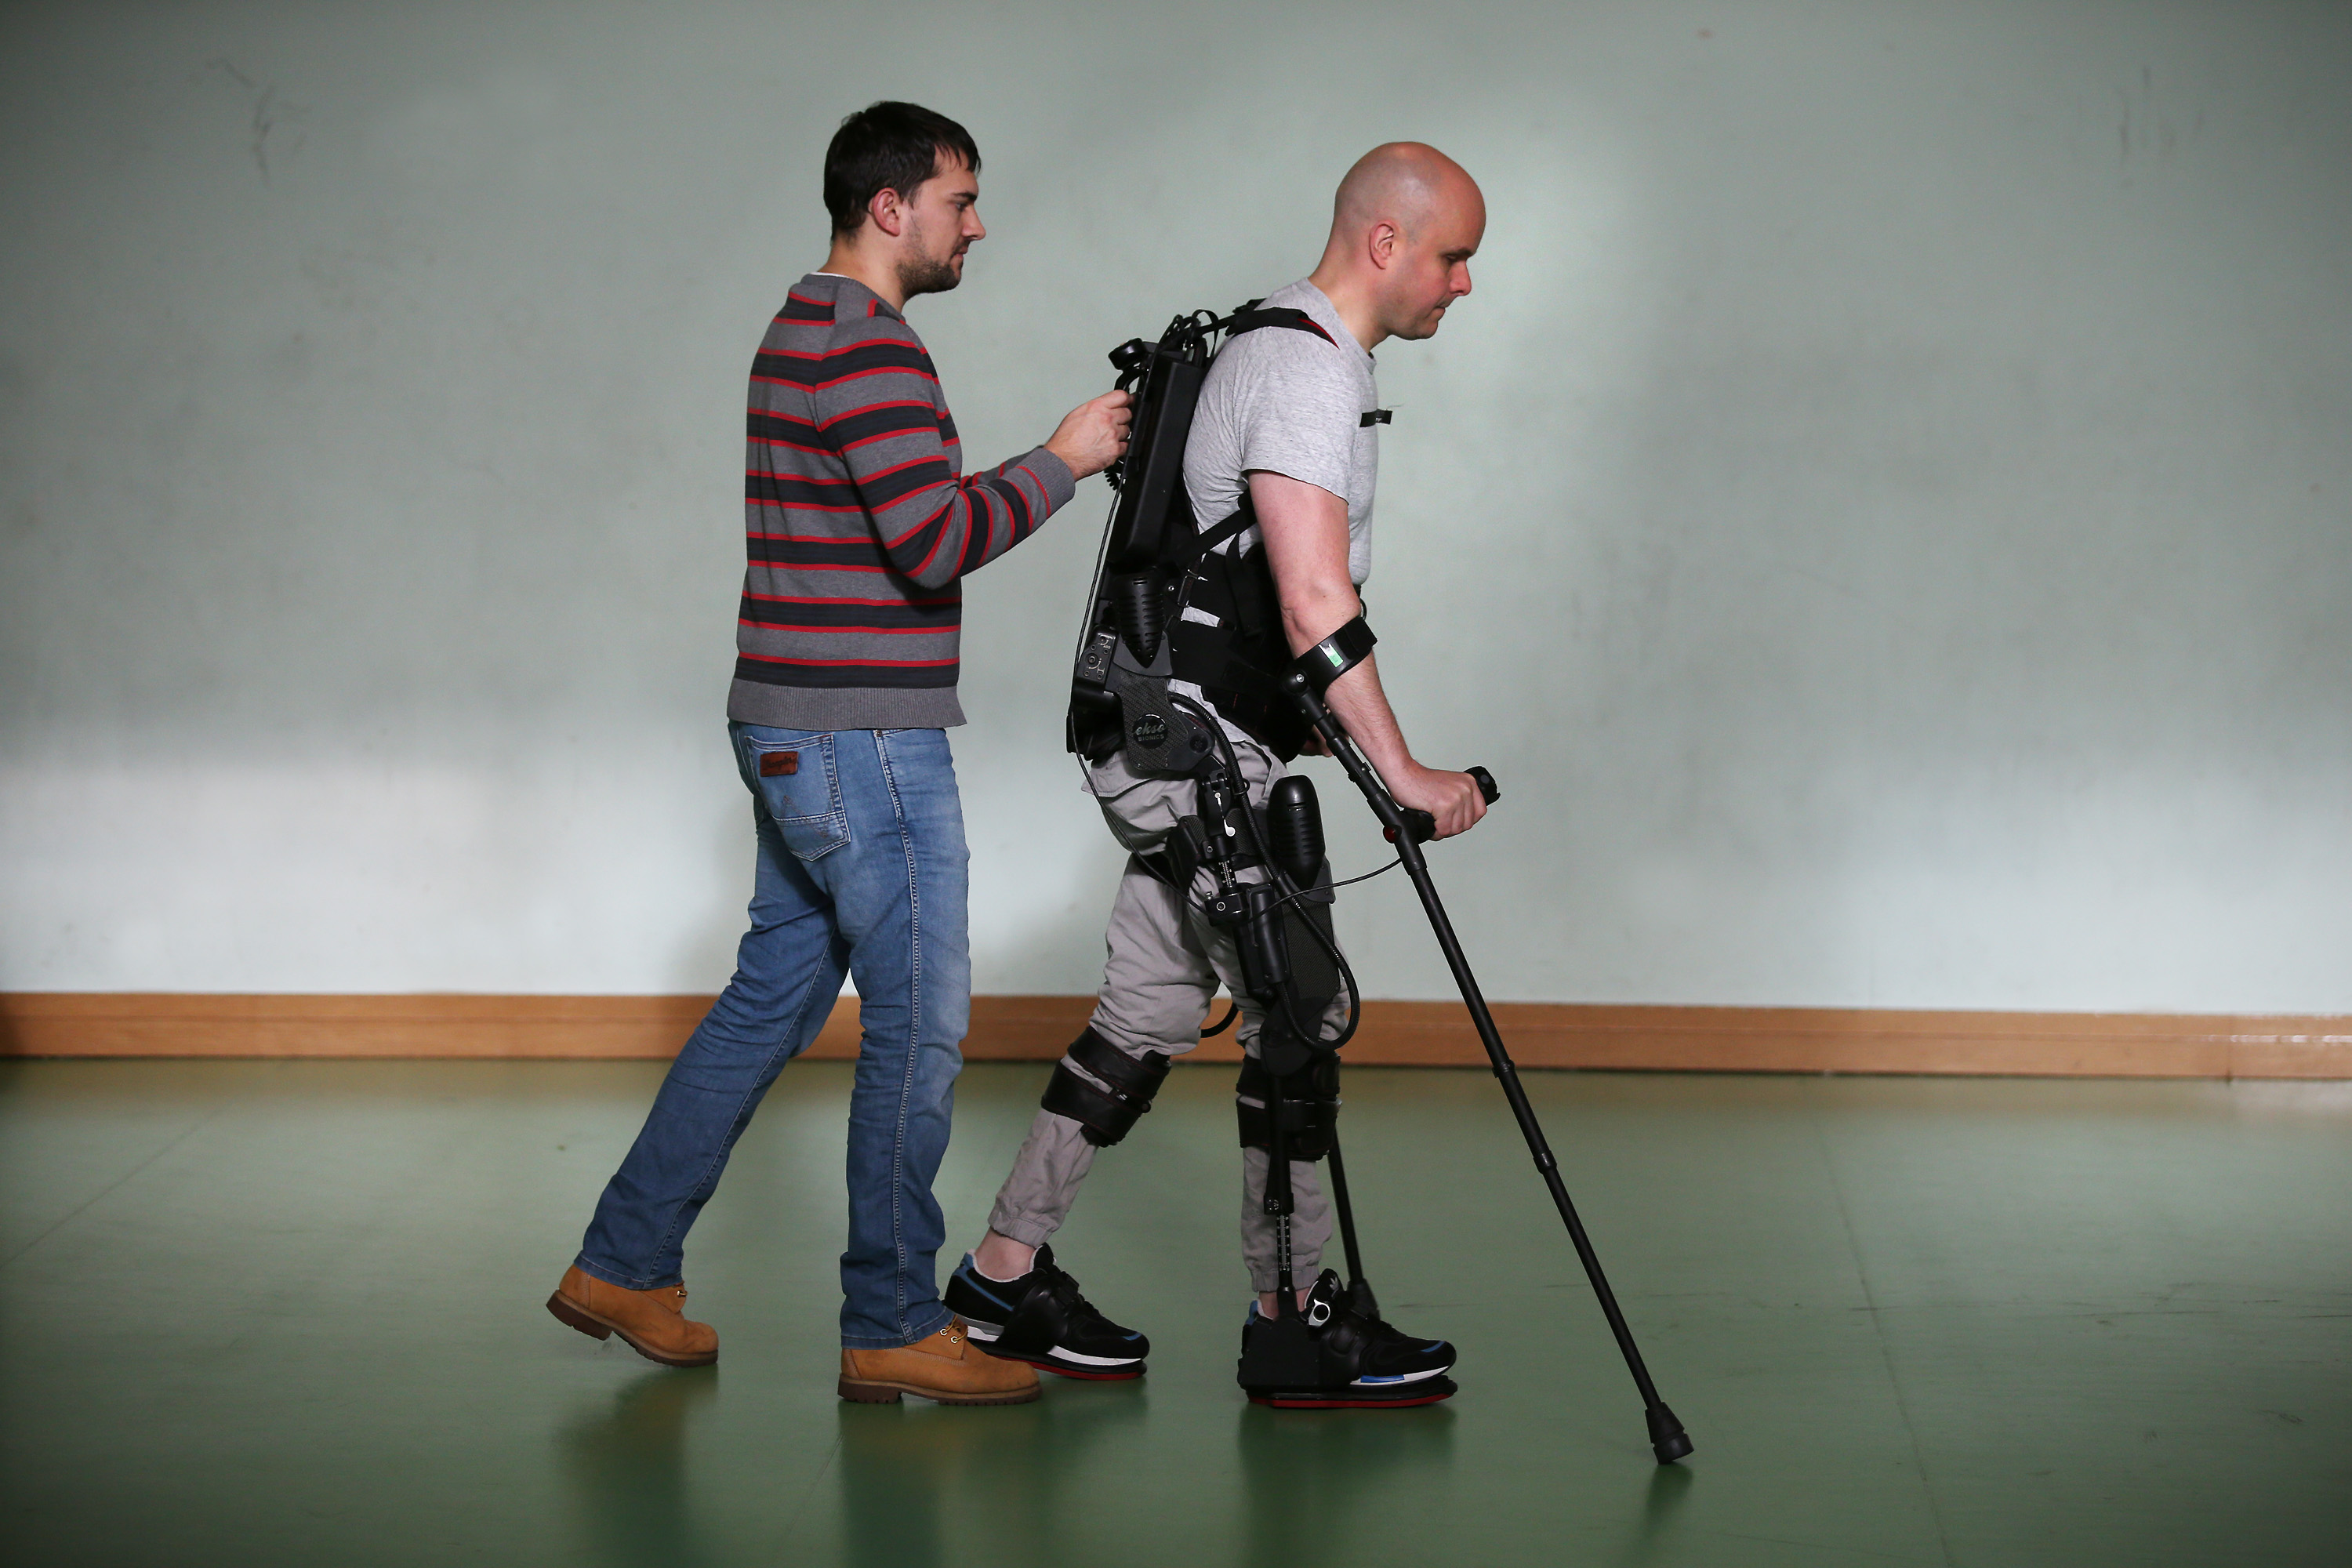 ALL IMAGES COPYRIGHT MARK POLLOCK TRUST. Mark Pollock is helped by his assistant as he walks using the Ekso Bionics robotic exoskeleton at Trinity College in Dublin 7th November 2015. Photographed by Peter Macdiarmid for the Mark Pollock Trust.